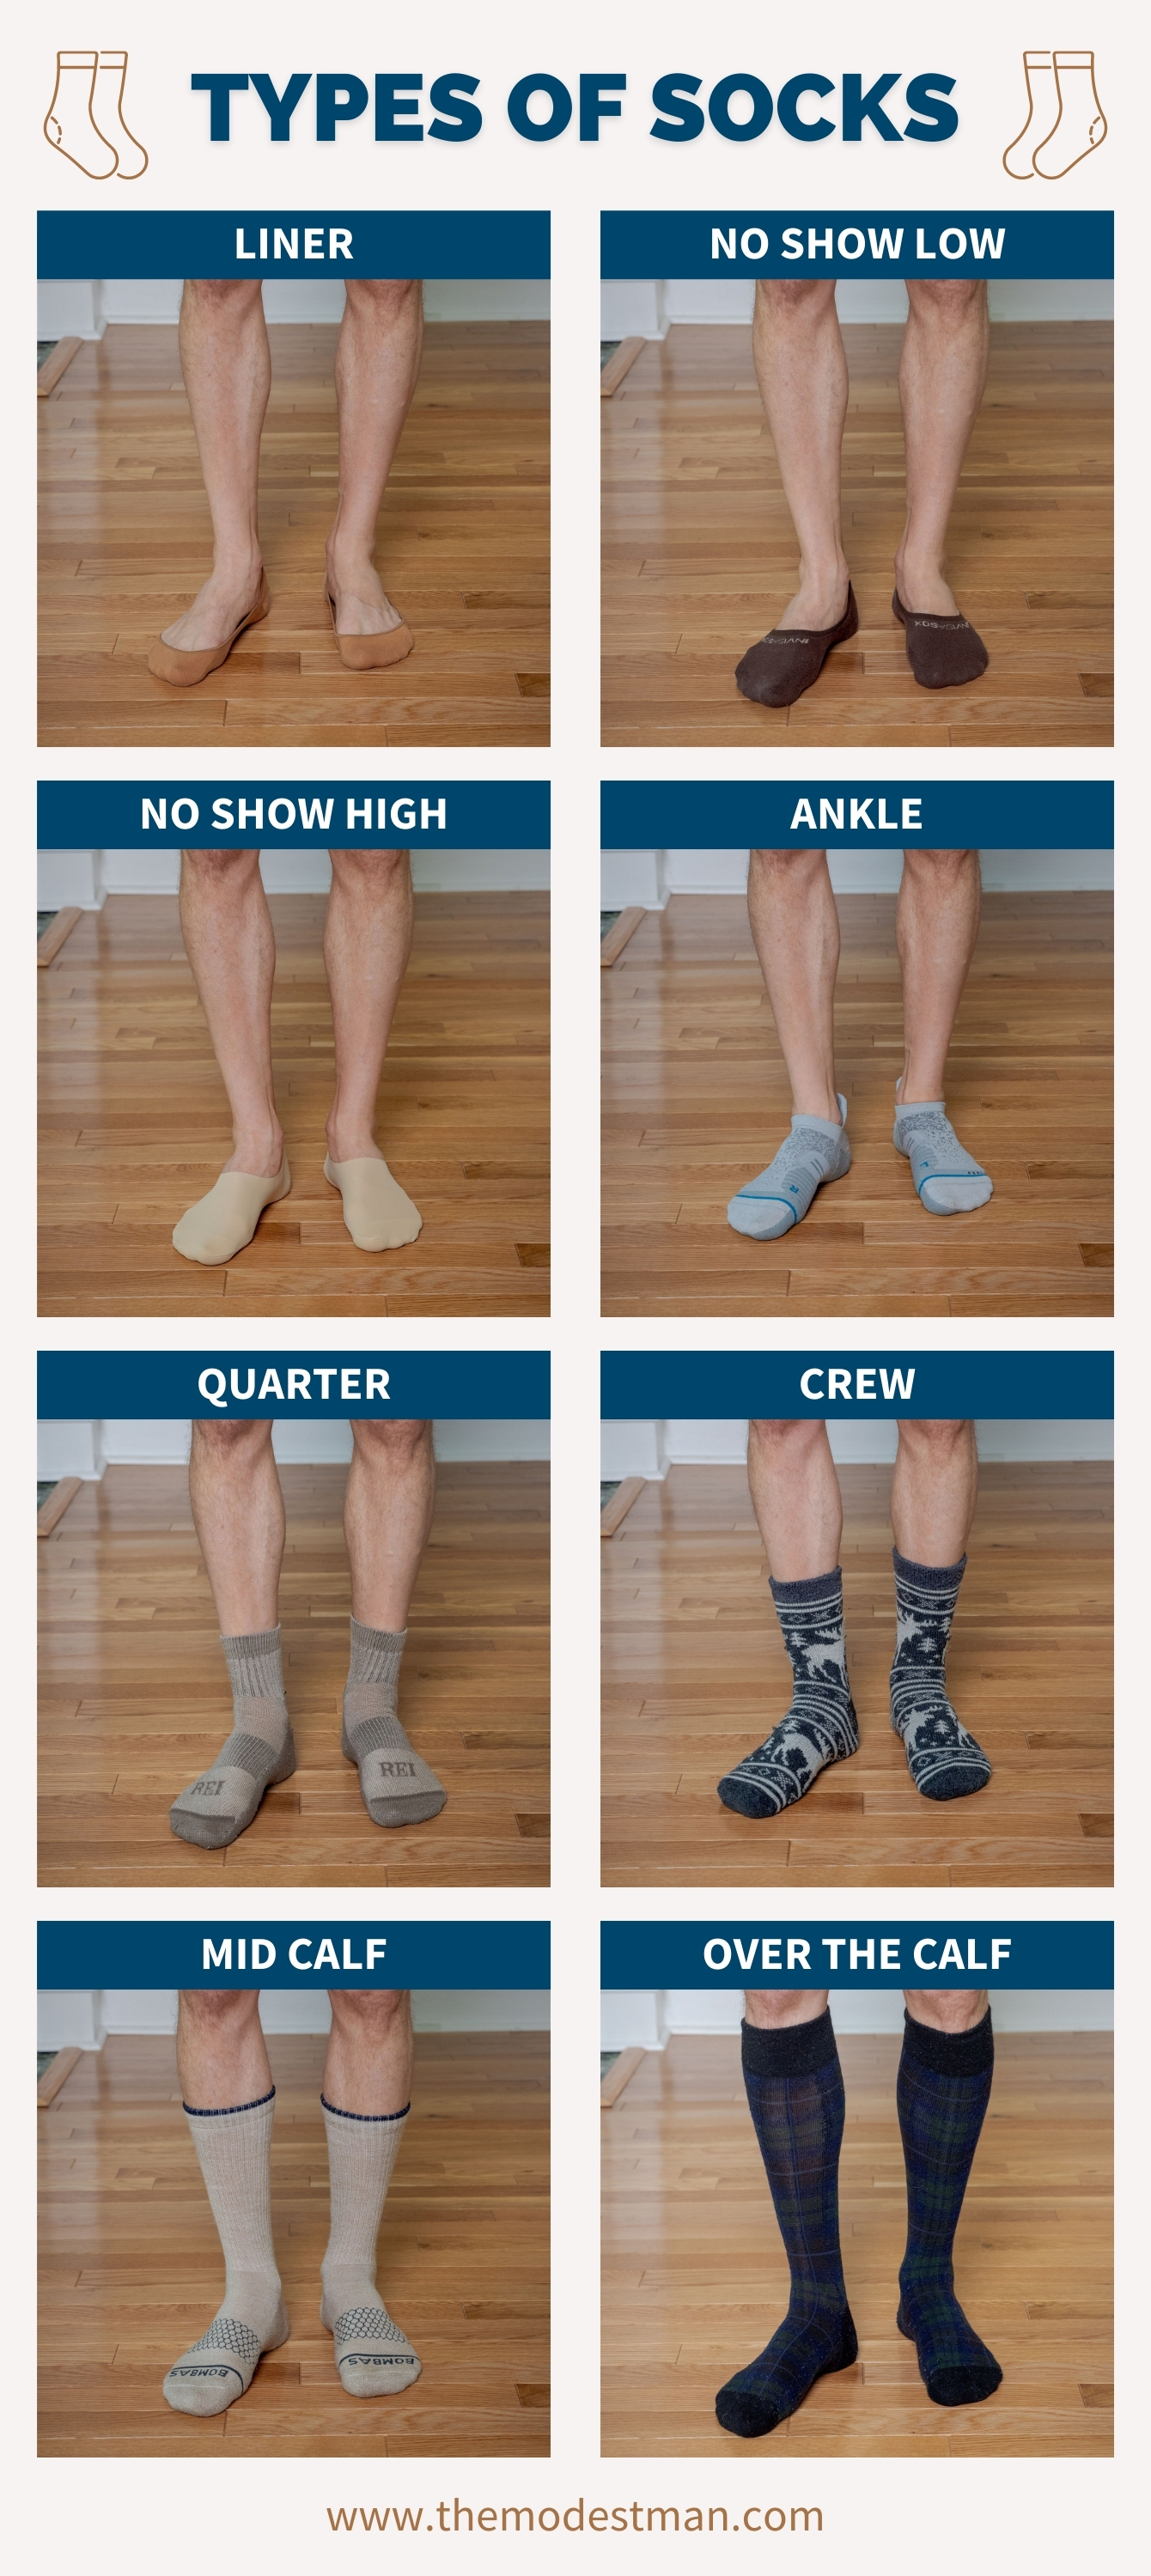 Let's Talk About Toe Socks (and why you should consider buying a pair)